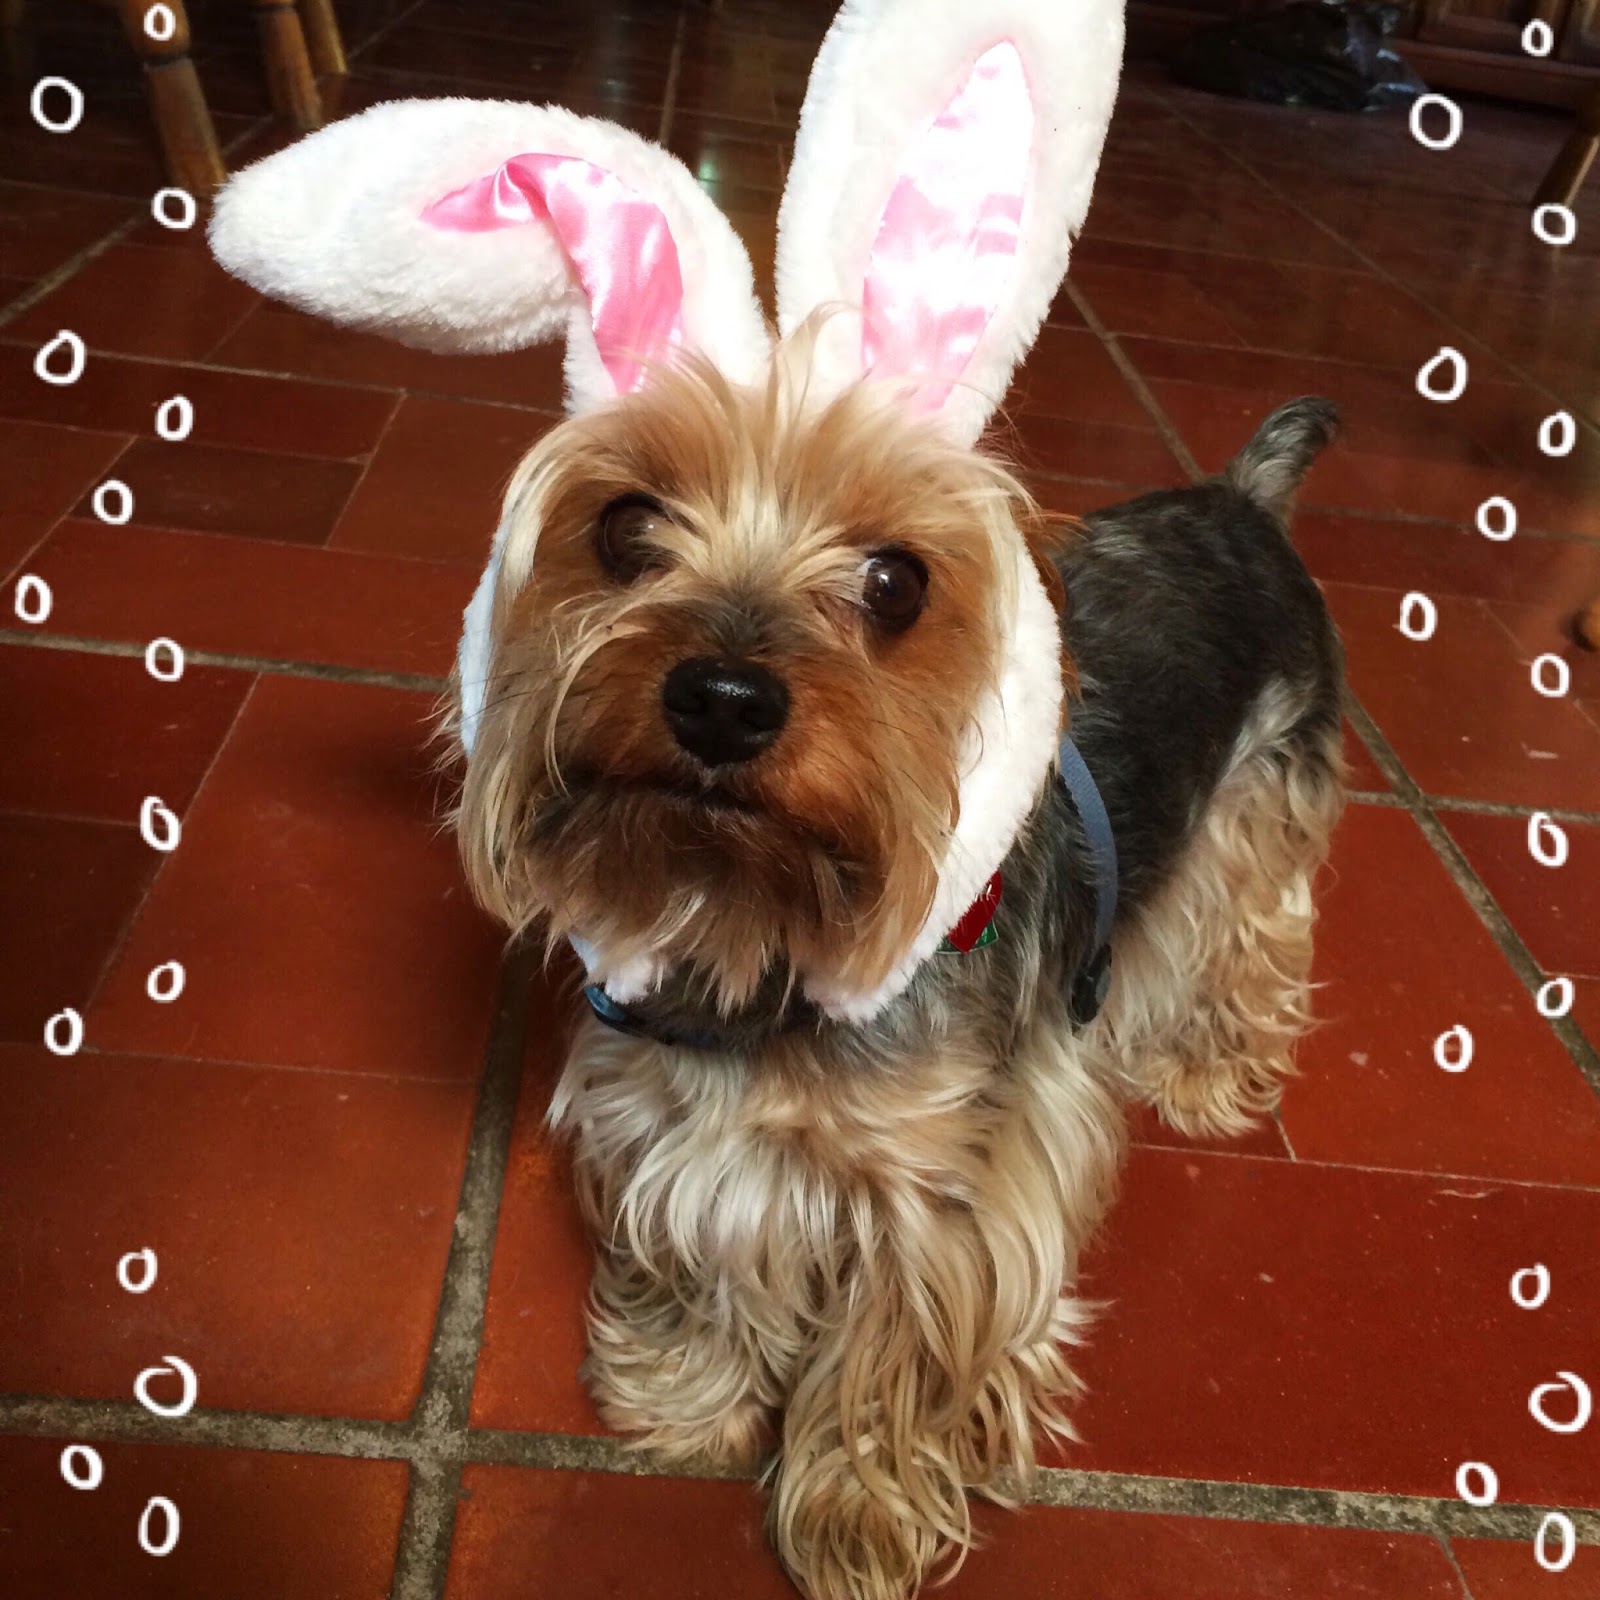 Cutest Easter Bunny Ever!